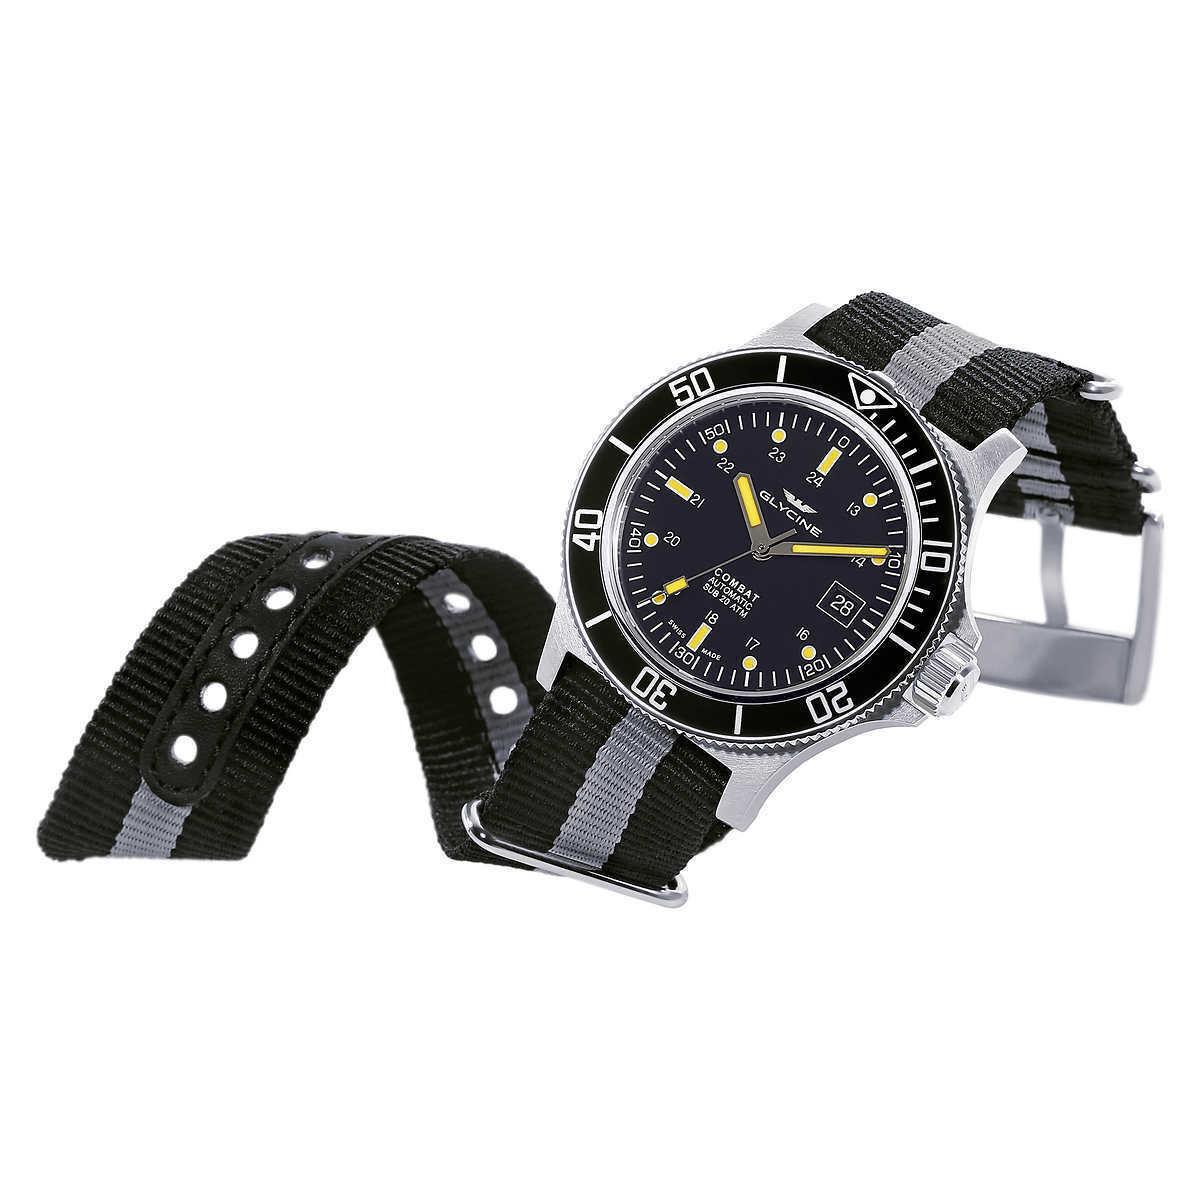 Glycine watch Combat SUB - Black Dial, Silver Band